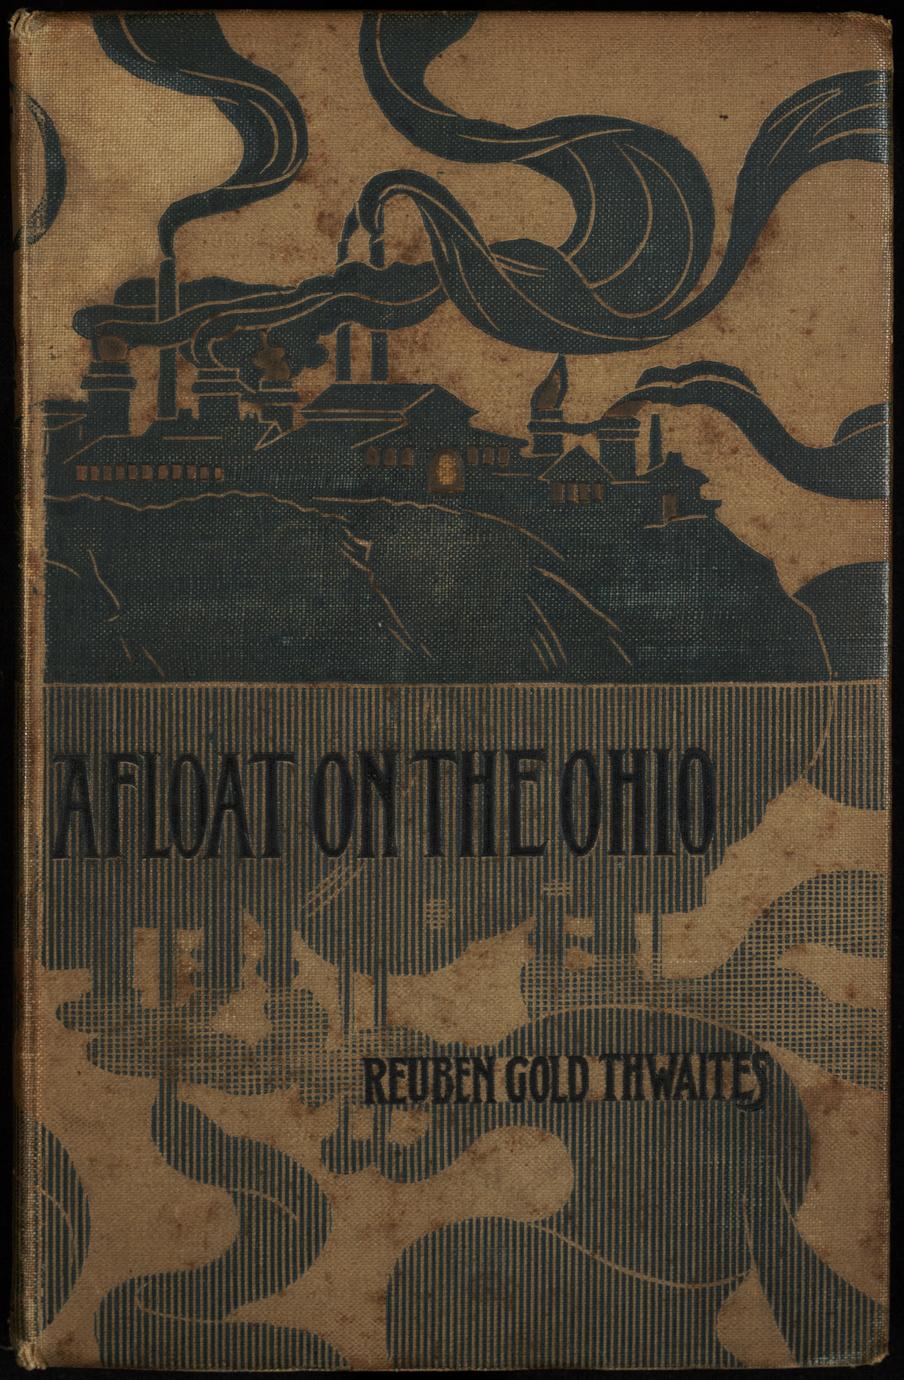 Afloat on the Ohio : an historical pilgrimage of a thousand miles in a skiff, from Redstone to Cairo (1 of 4)